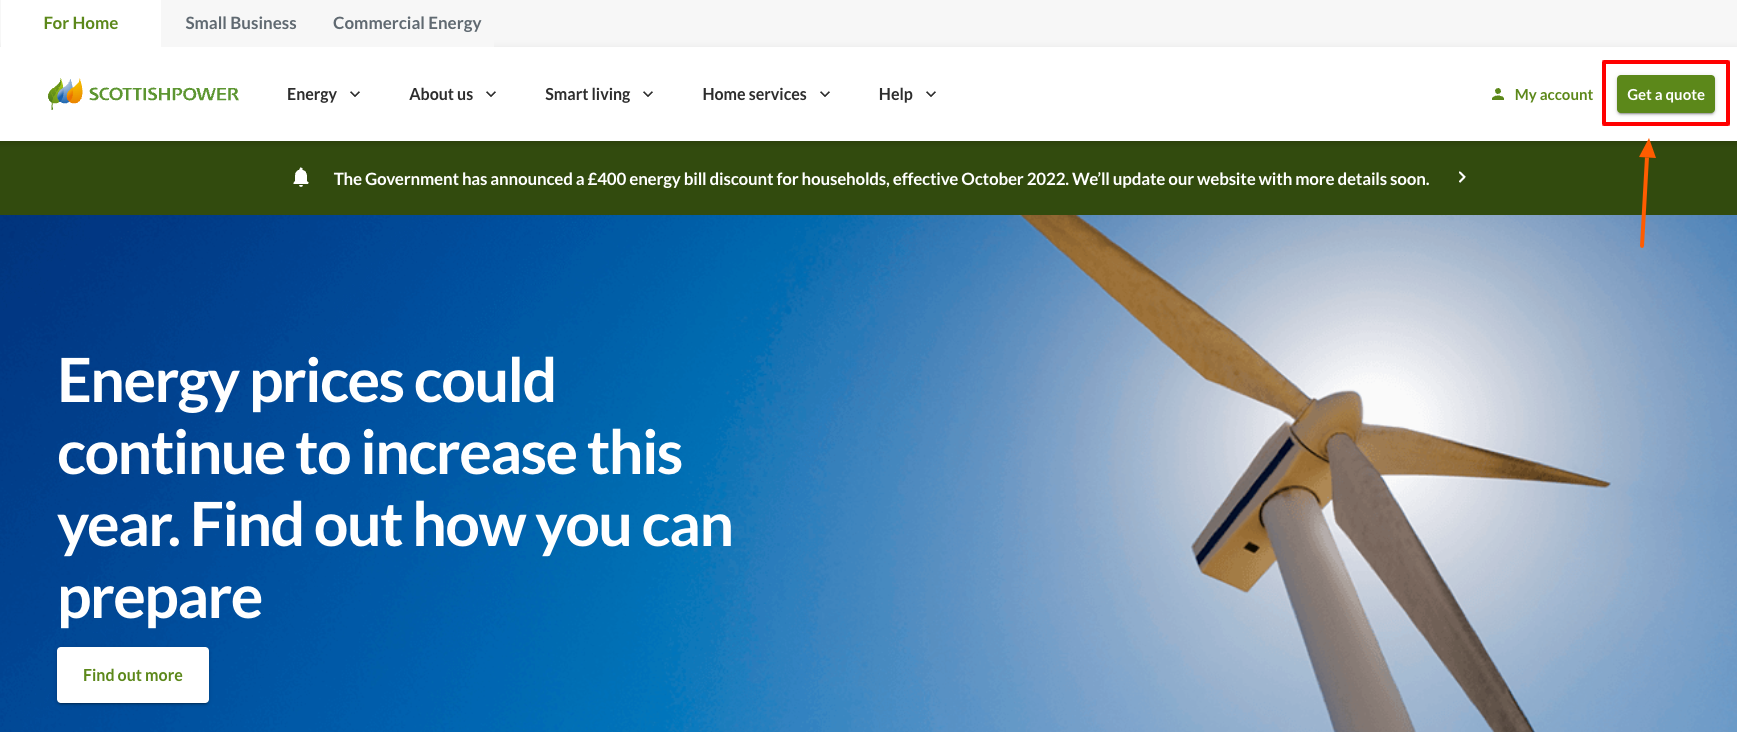 Scottish Power get a quote page